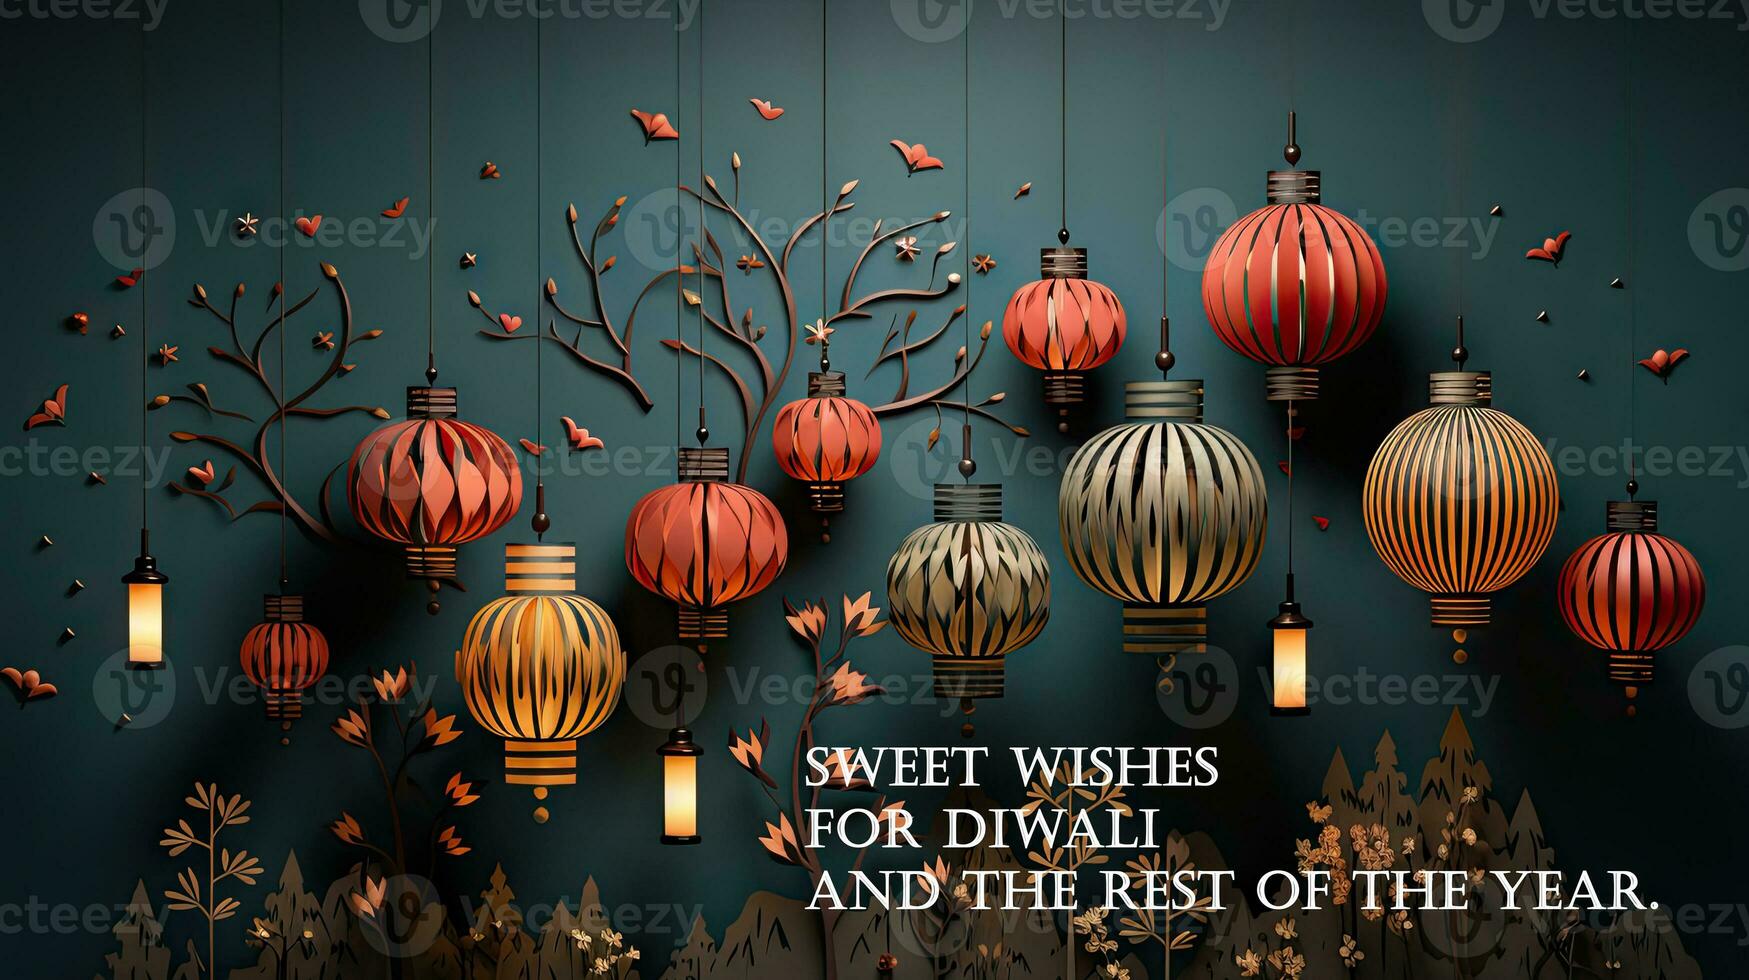 Sweet wishes for Diwali and the rest of the year. photo